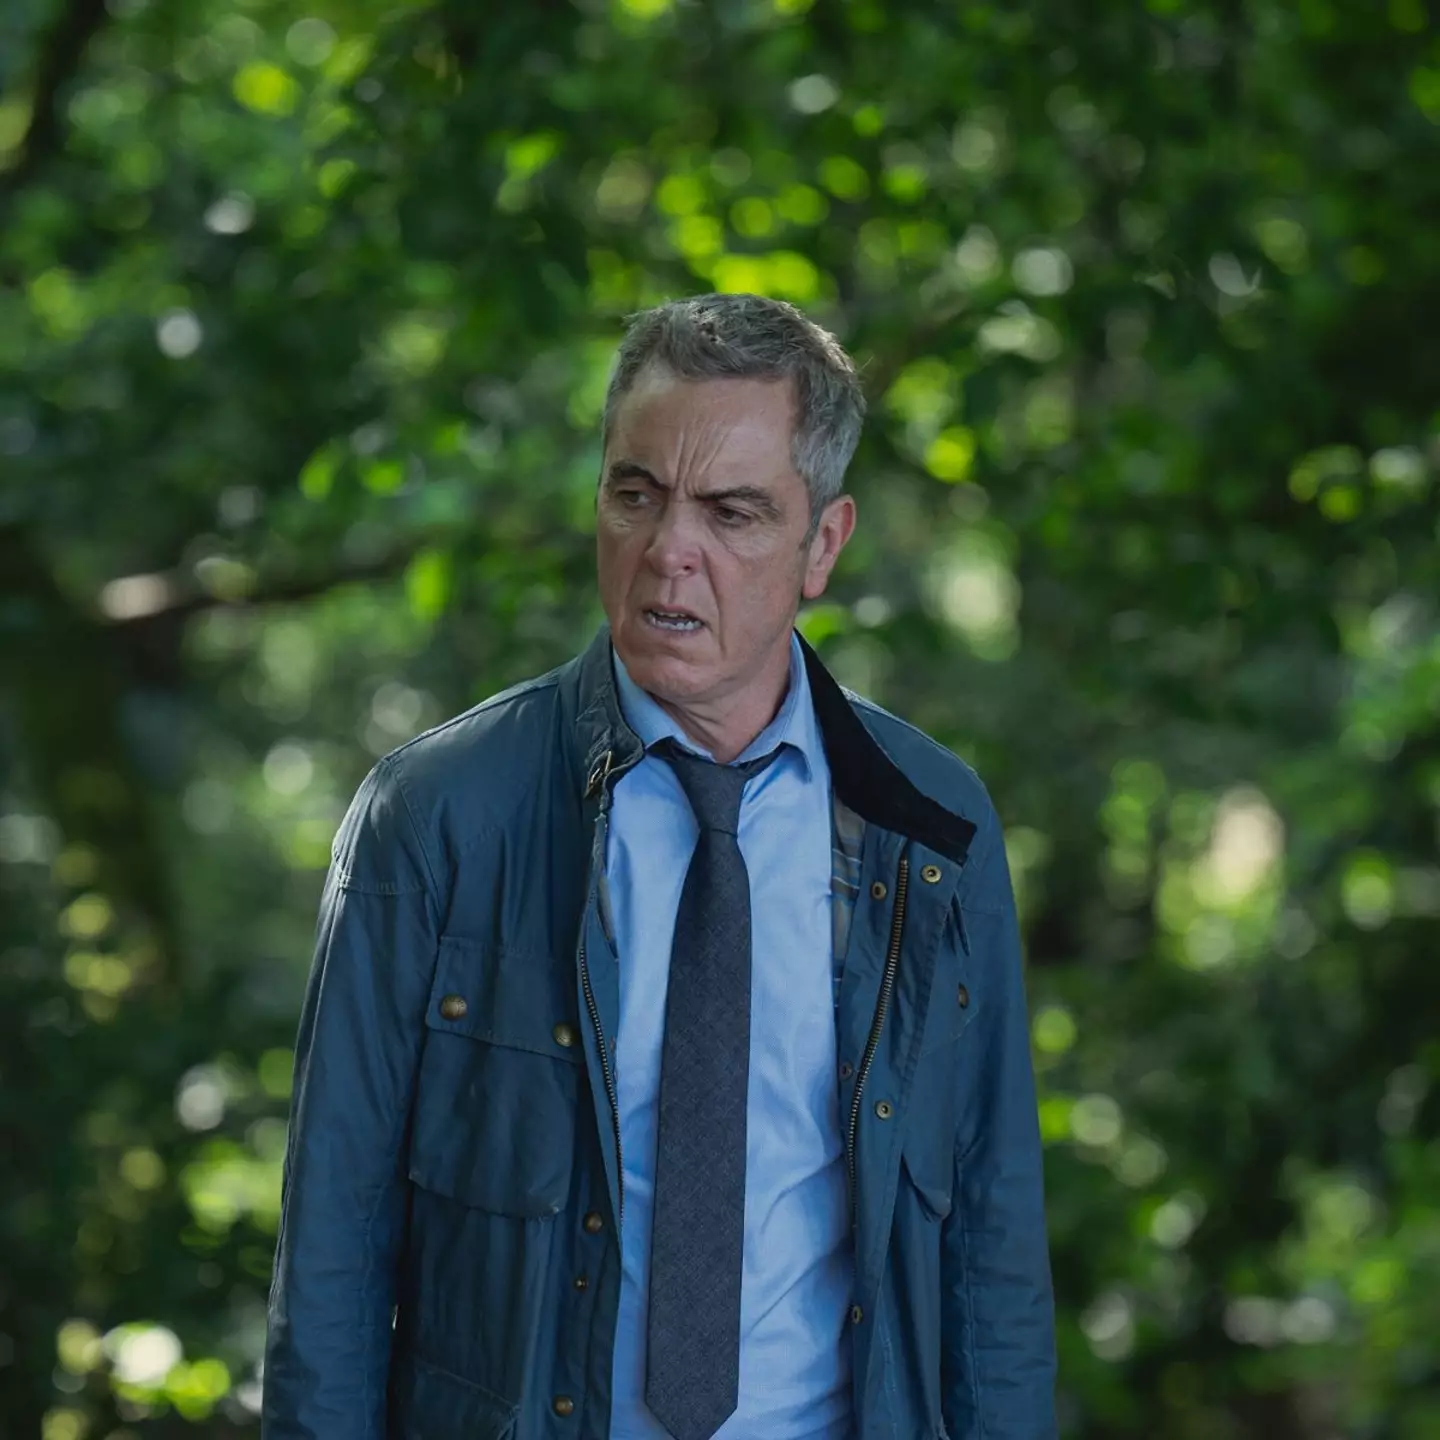 James Nesbitt as detective Michael Broome wore blue throughout, which apparently signalled him as the law and a 'good' character. (